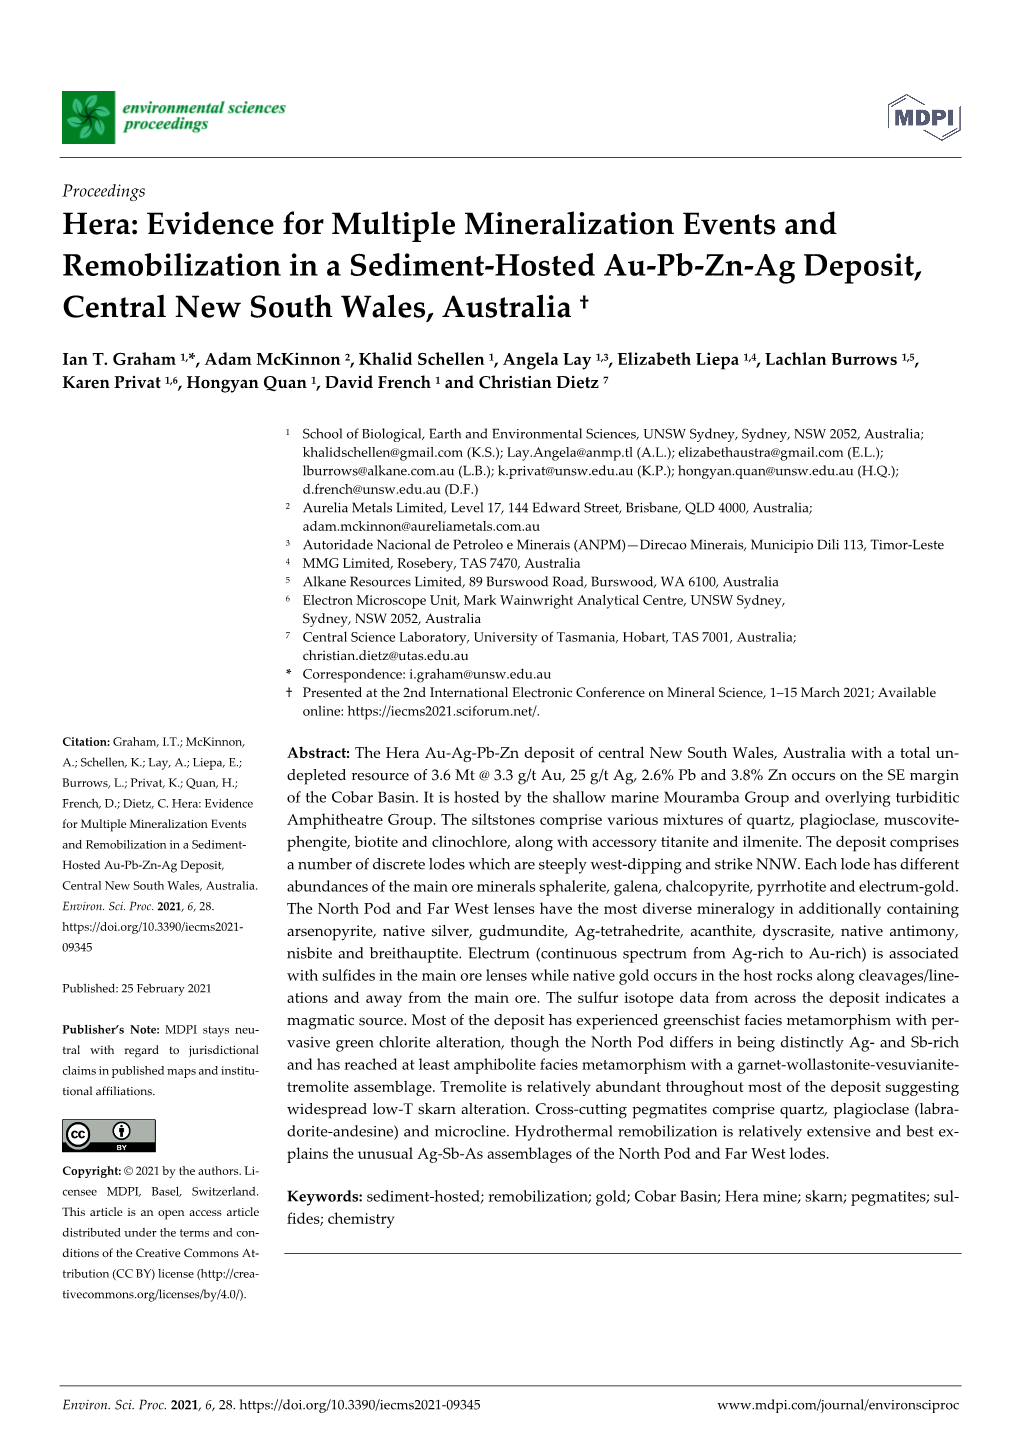 Hera: Evidence for Multiple Mineralization Events and Remobilization in a Sediment-Hosted Au-Pb-Zn-Ag Deposit, Central New South Wales, Australia †